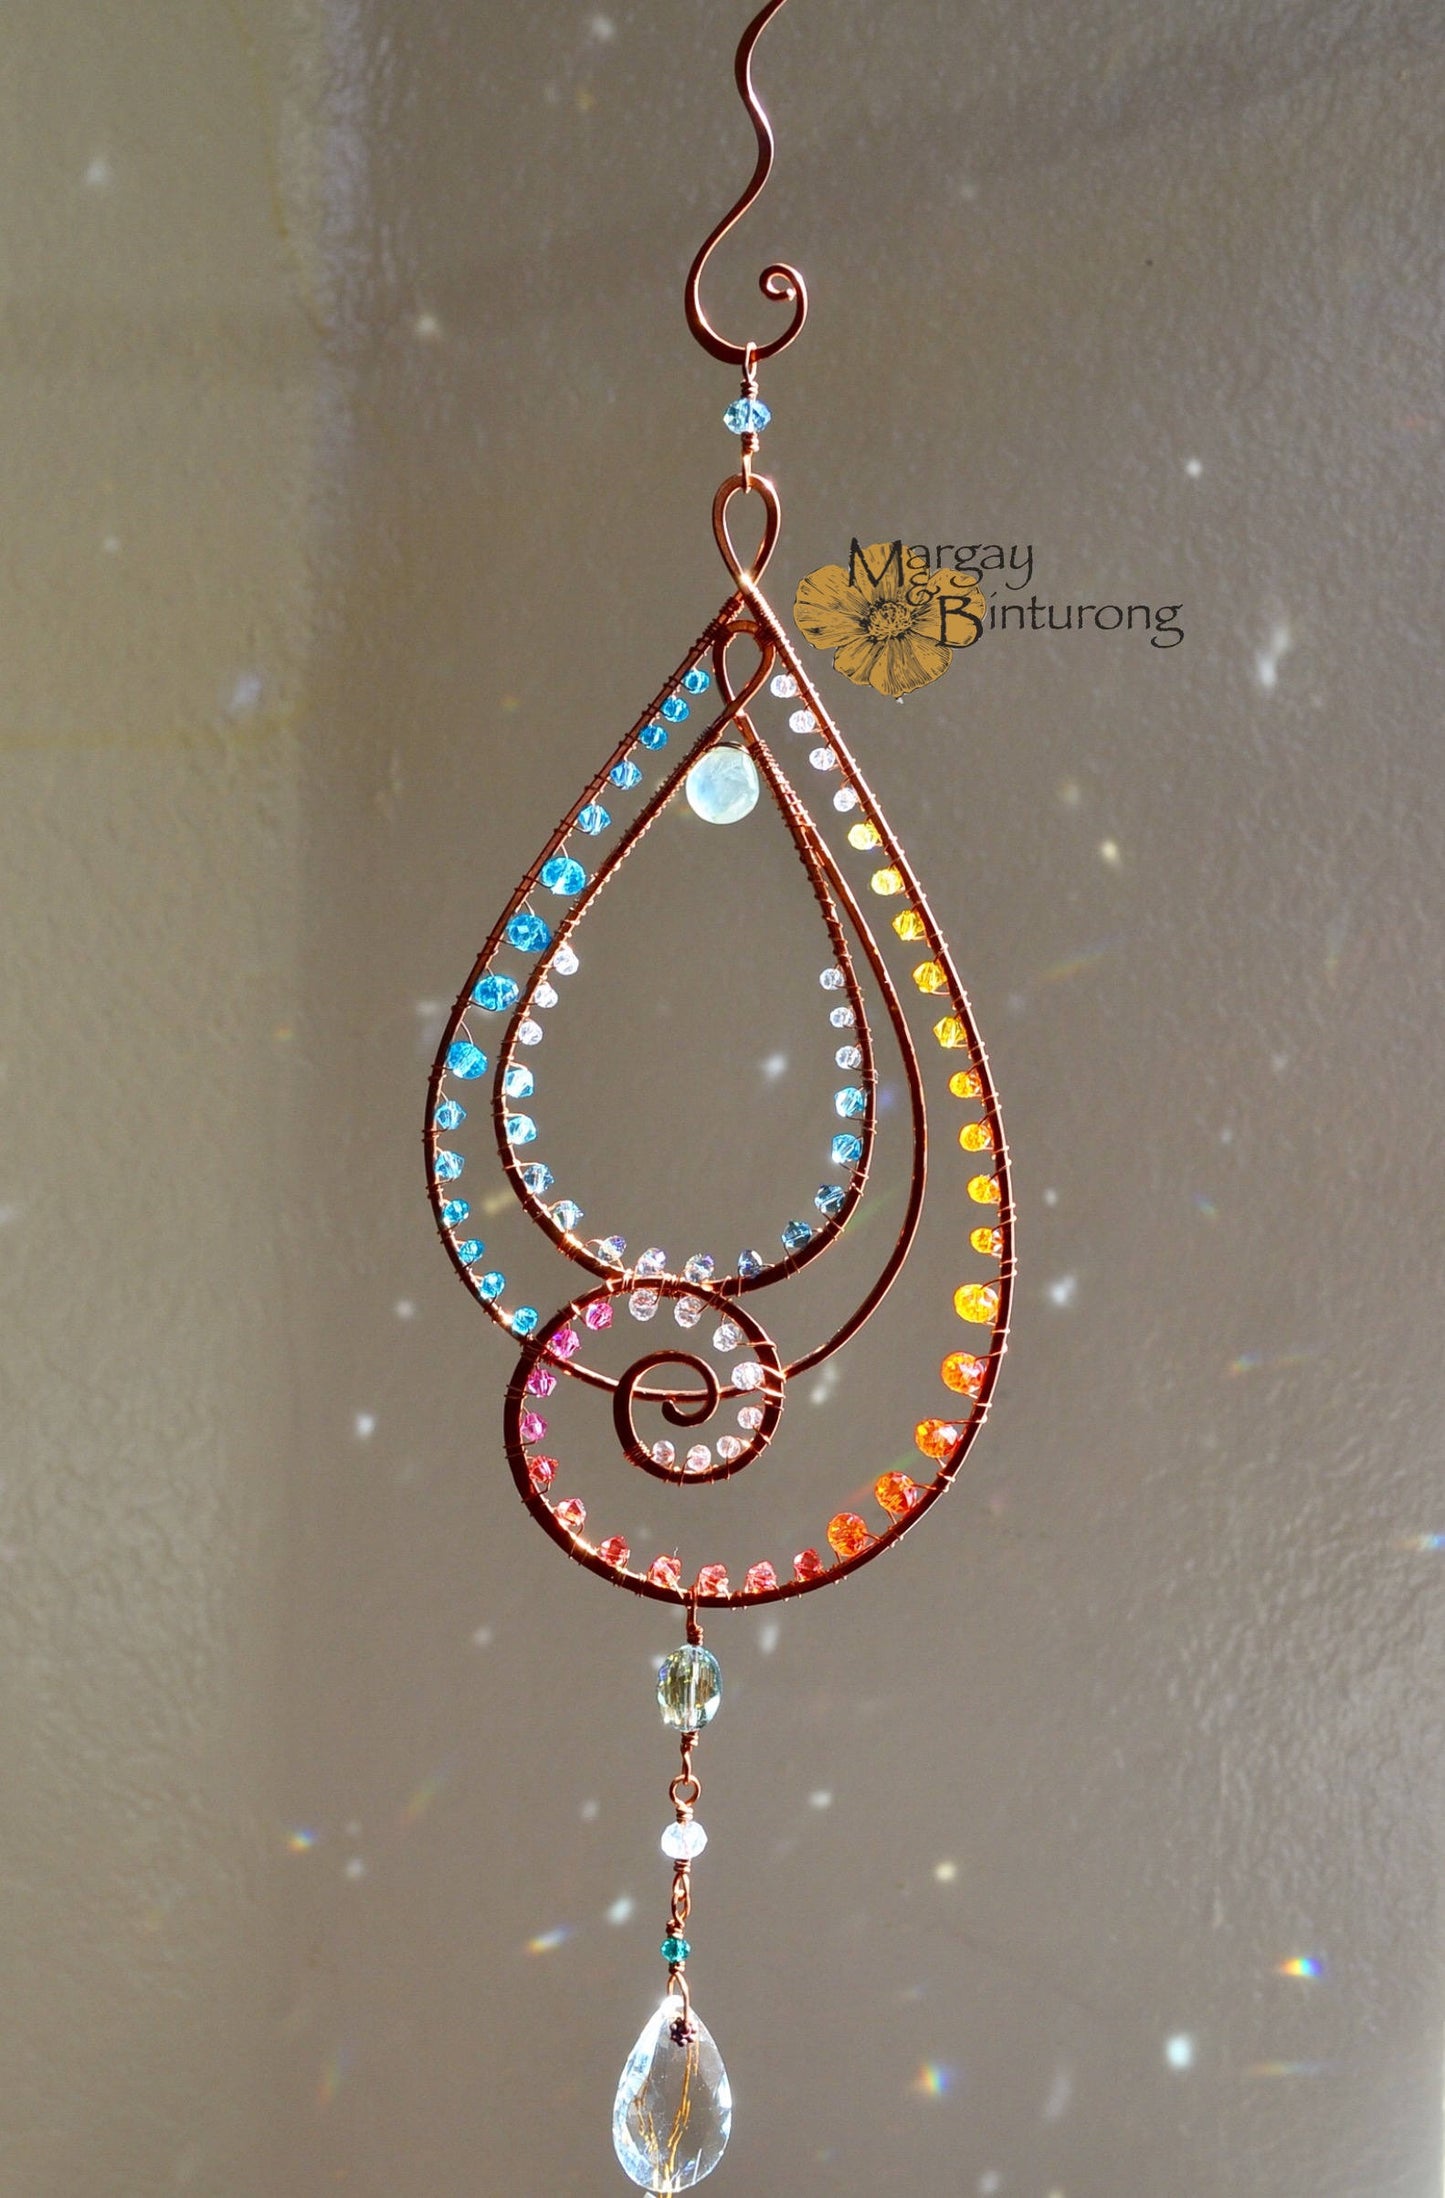 Paisley-esque Suncatcher made with Crystal prisms is wire art waiting to be hung in your home